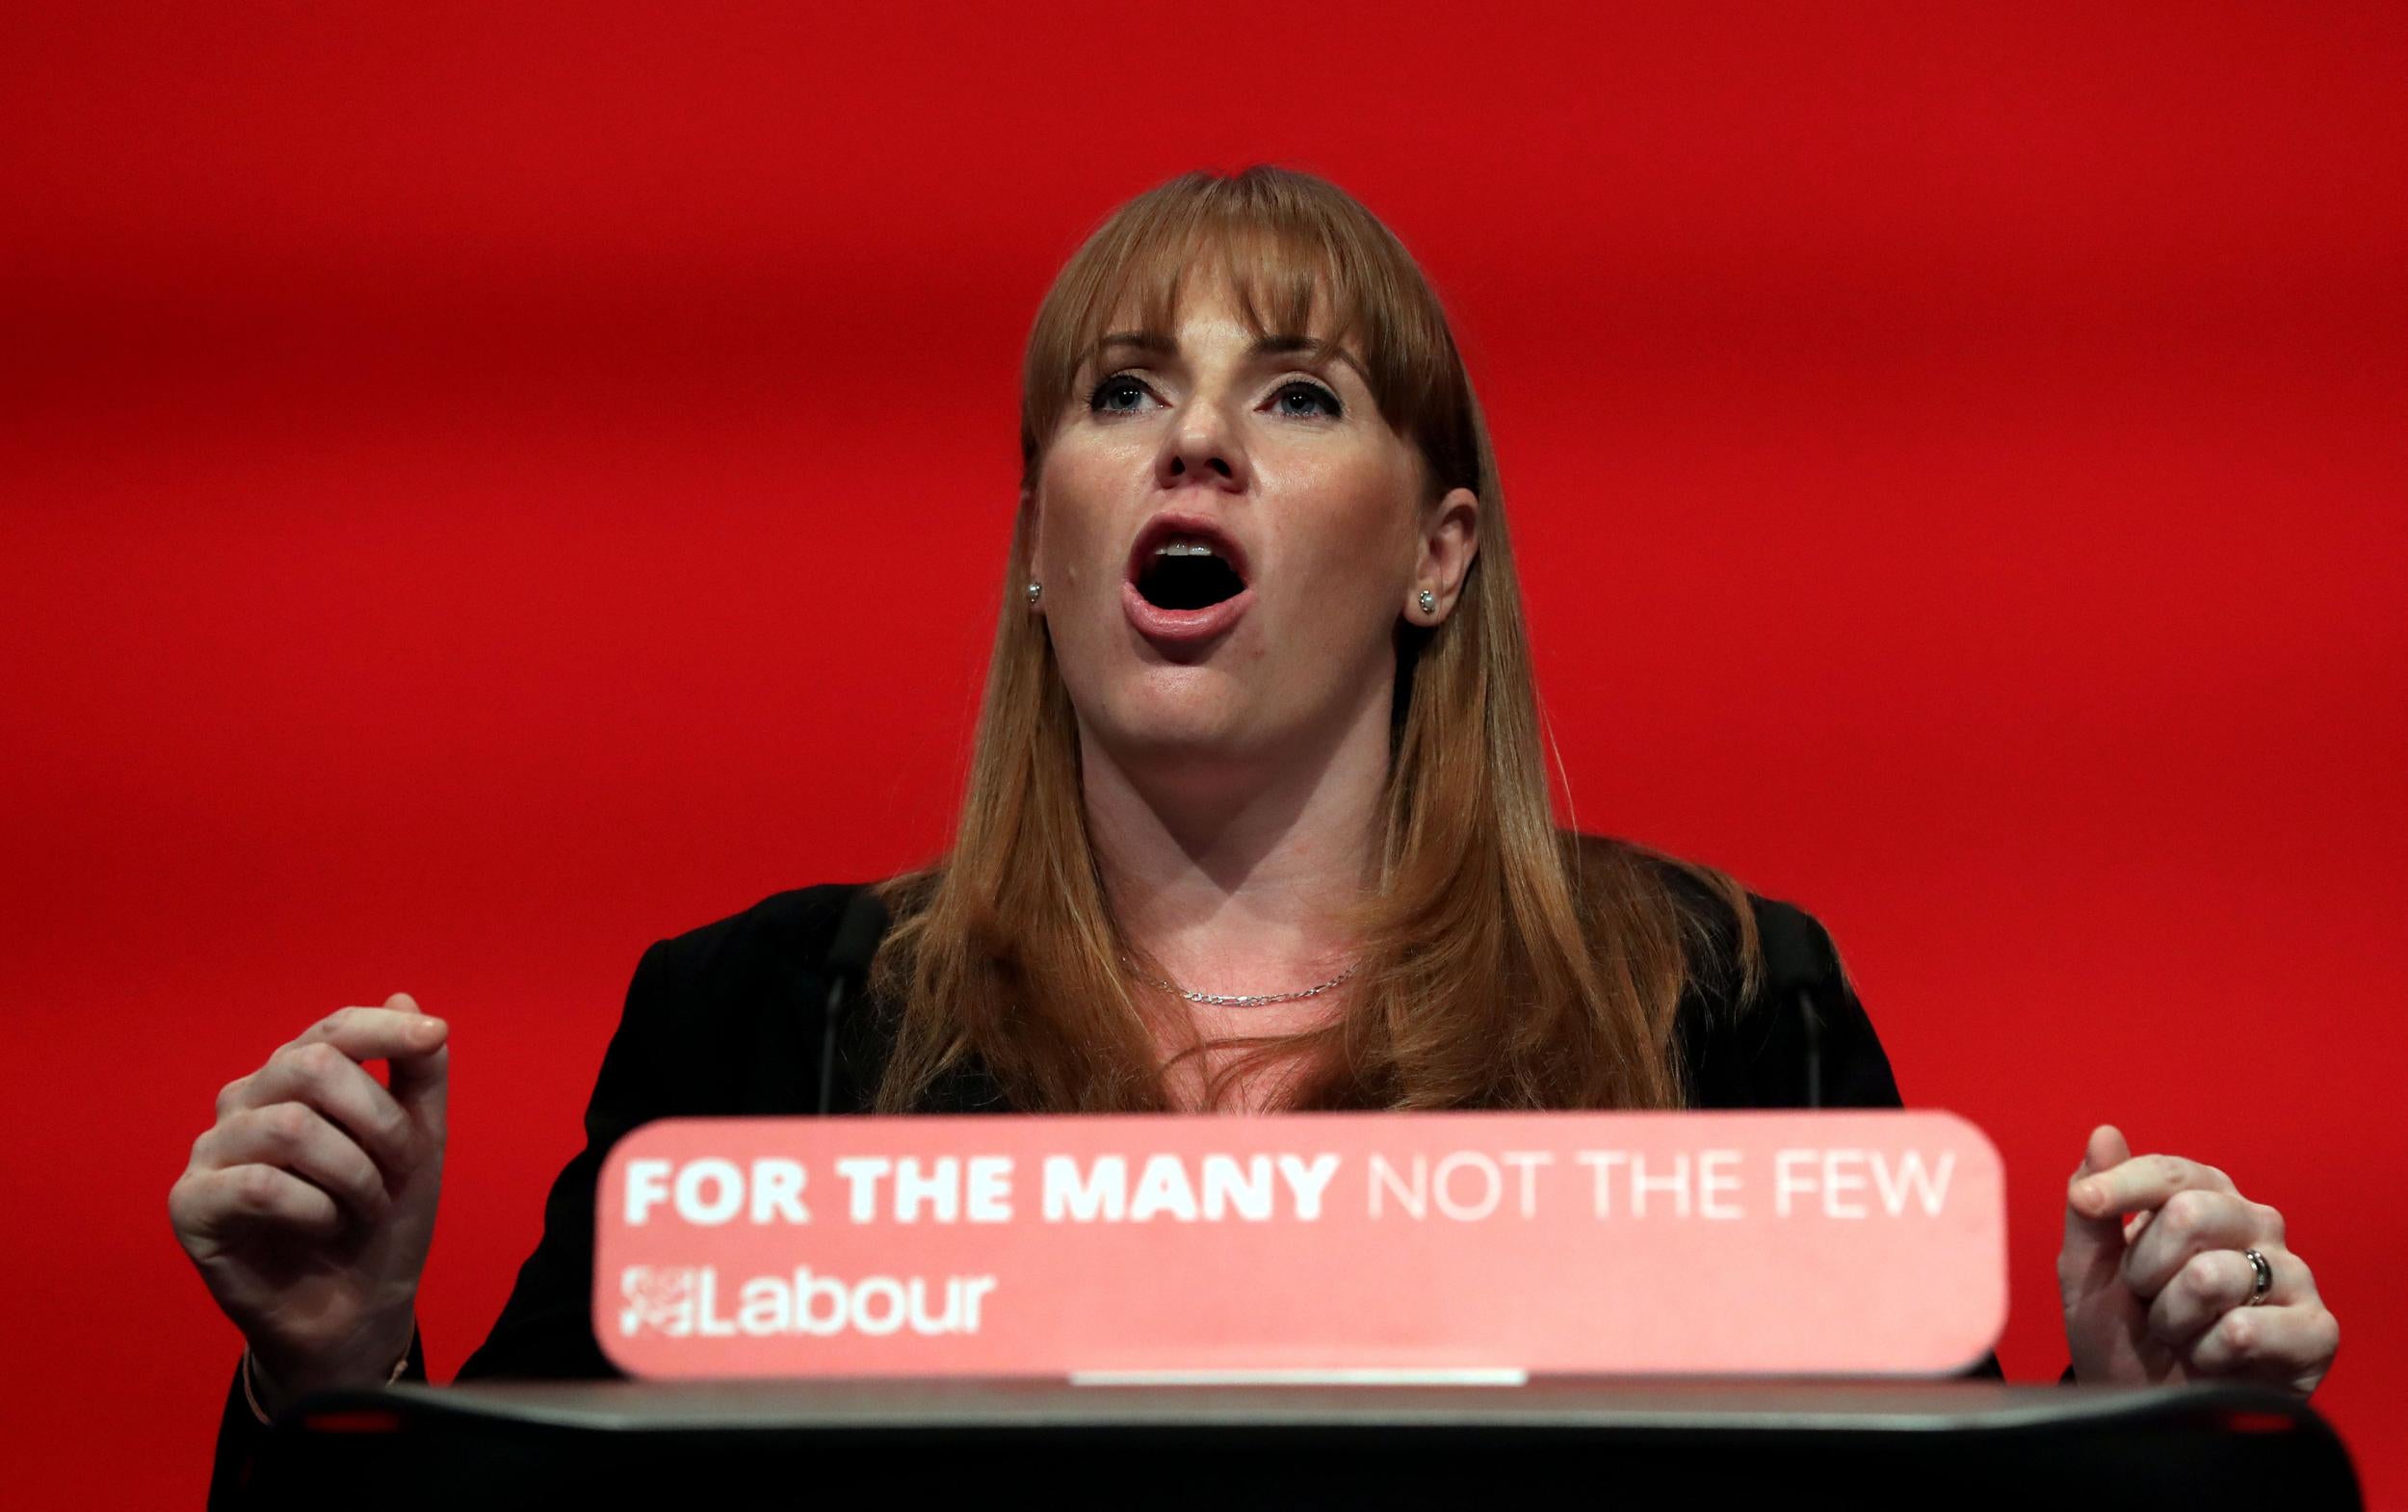 Speaking at the National Association of Head Teachers conference in Liverpool, the shadow education secretary said the current accountability system in schools was unfit for purpose